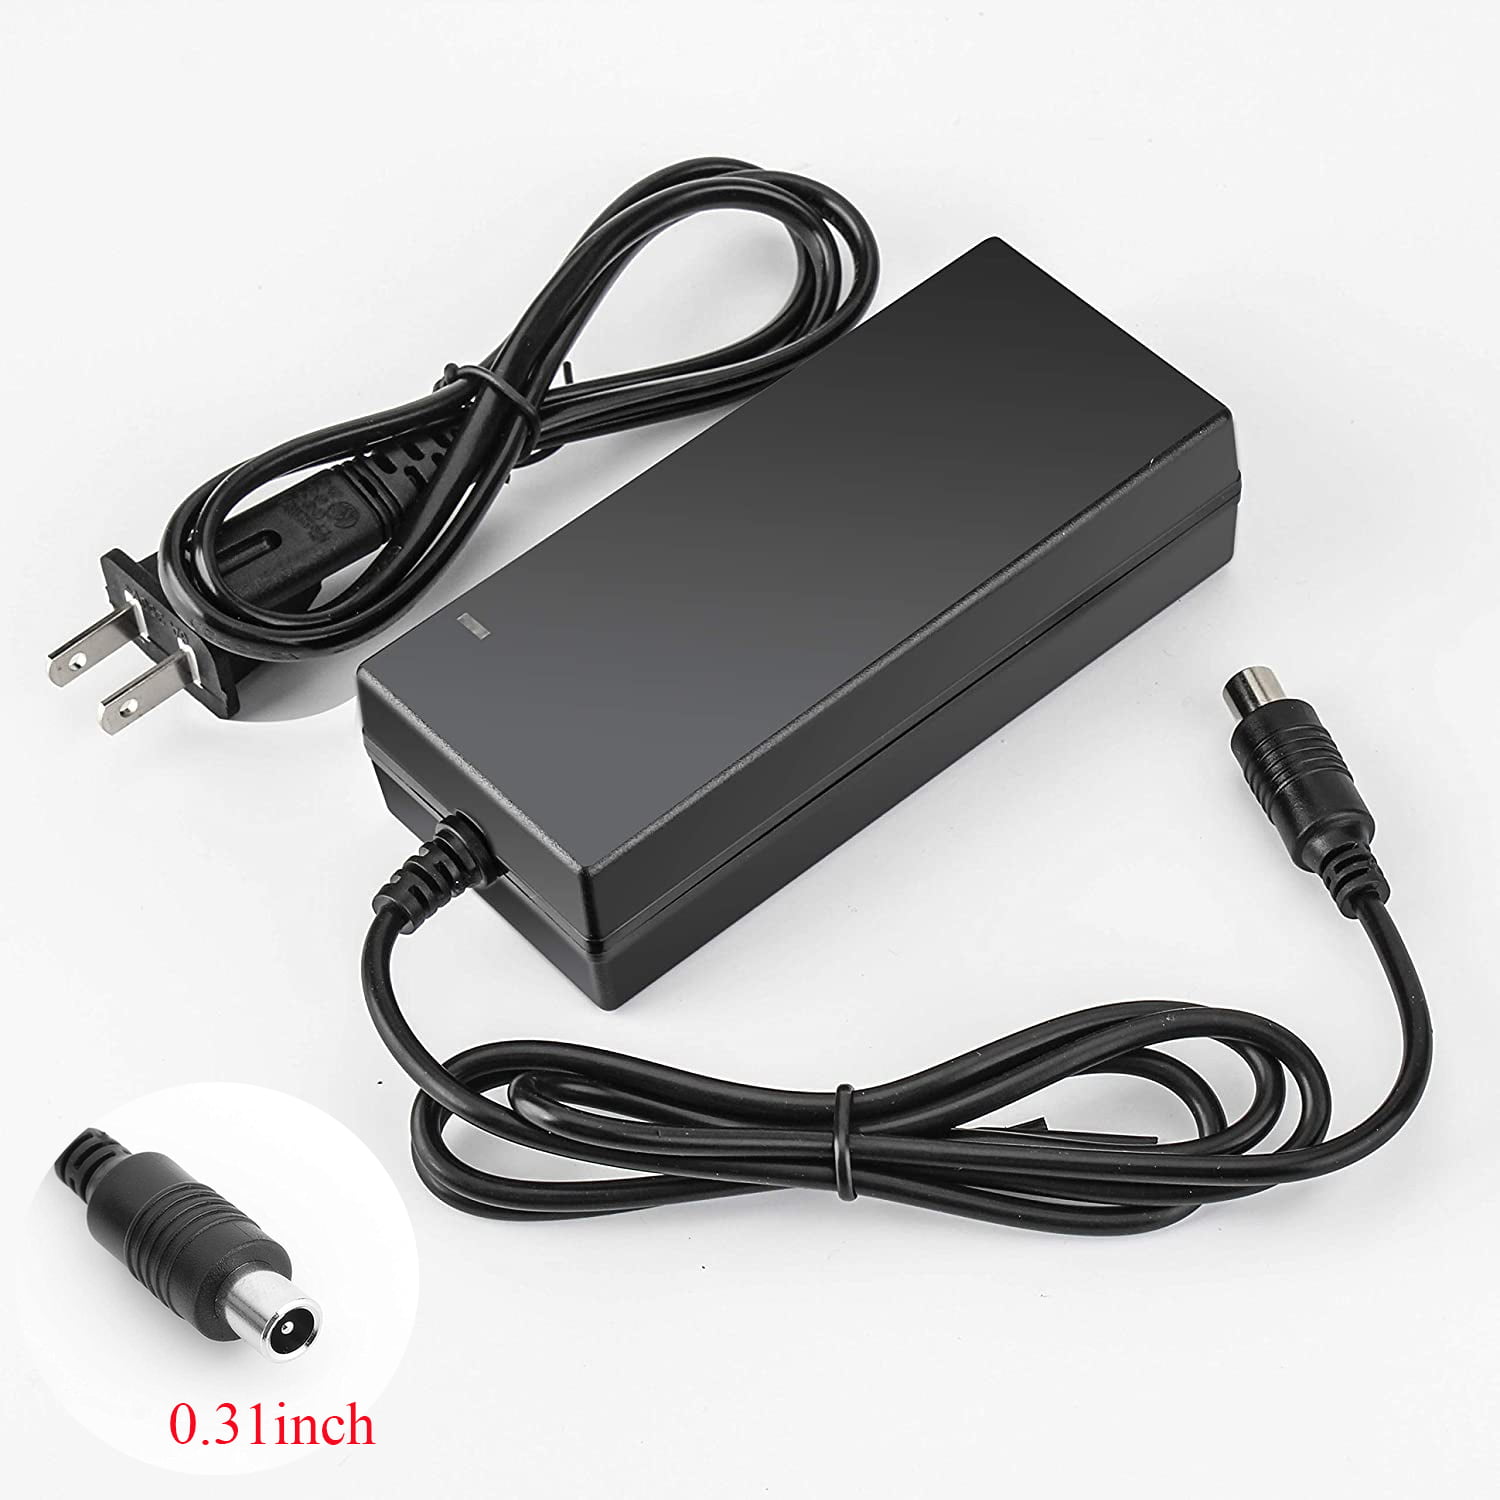 42V 2A Power Supply Charger for Bird Lime Xiaomi Mijia M365 Scooter US Seller 